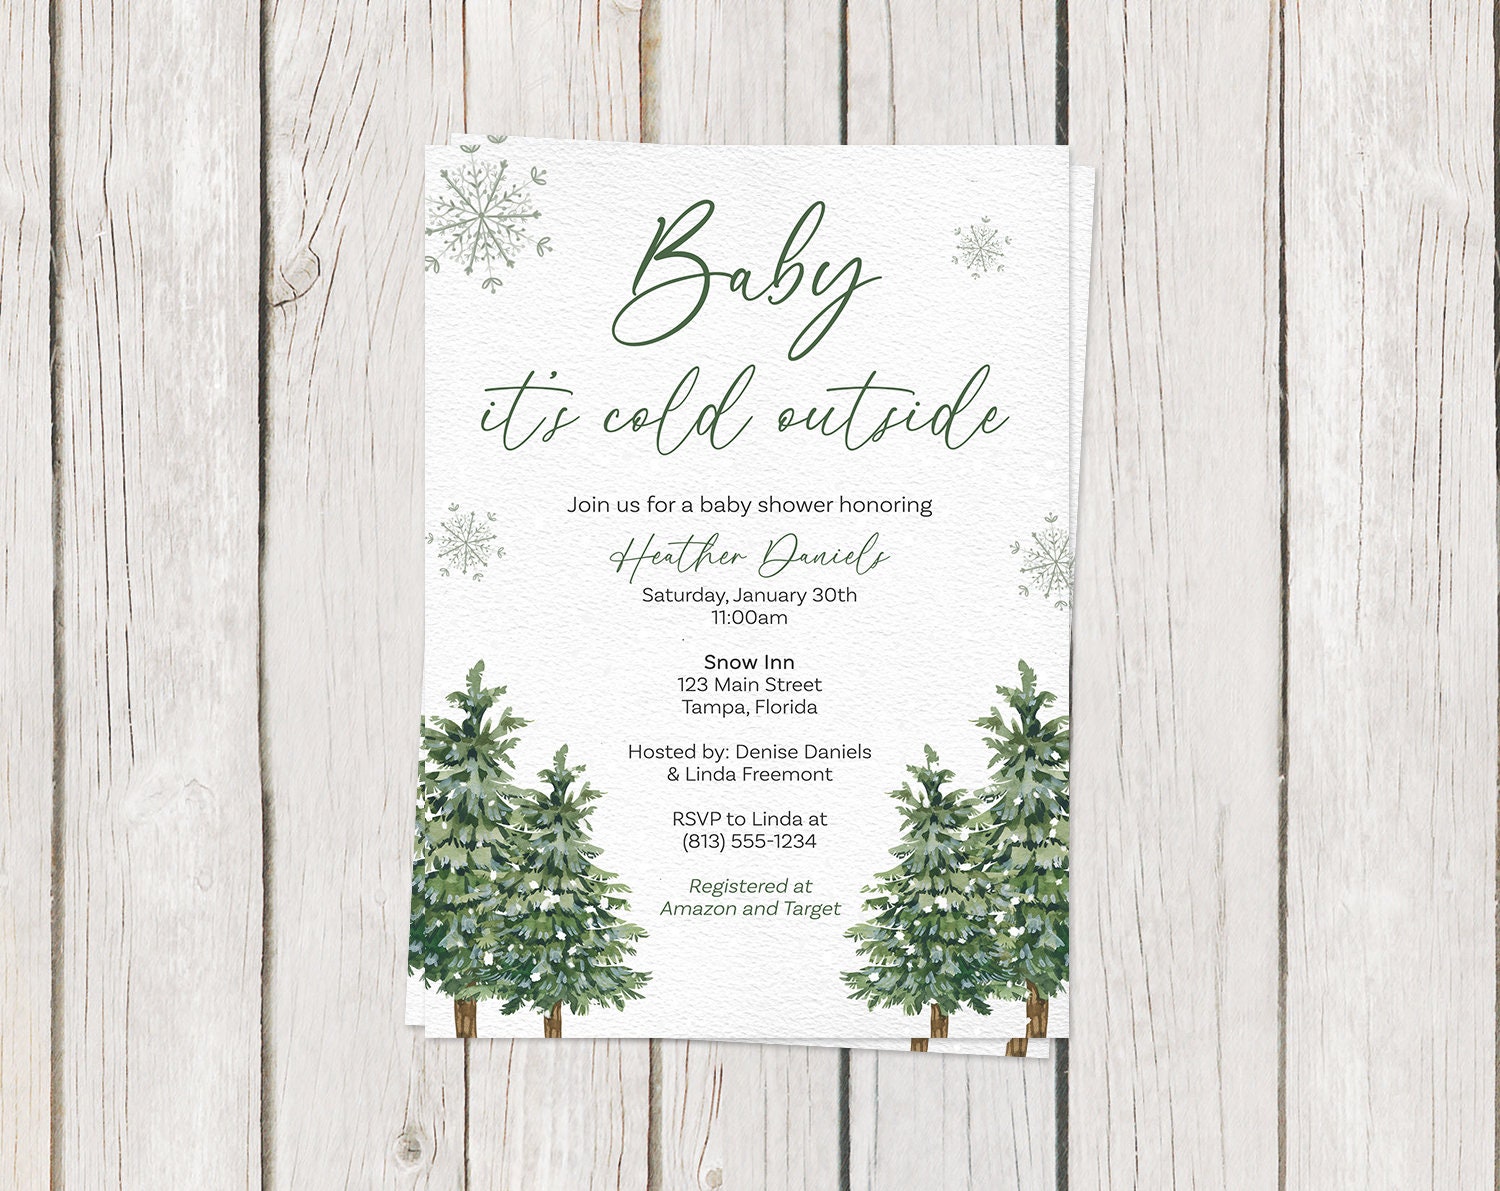 Invitation Printing, 5x7 Inches, Printed on Matte Cardstock, Print Your  Invites or Files, Envelopes Included, Print My Cards, Free Shipping 